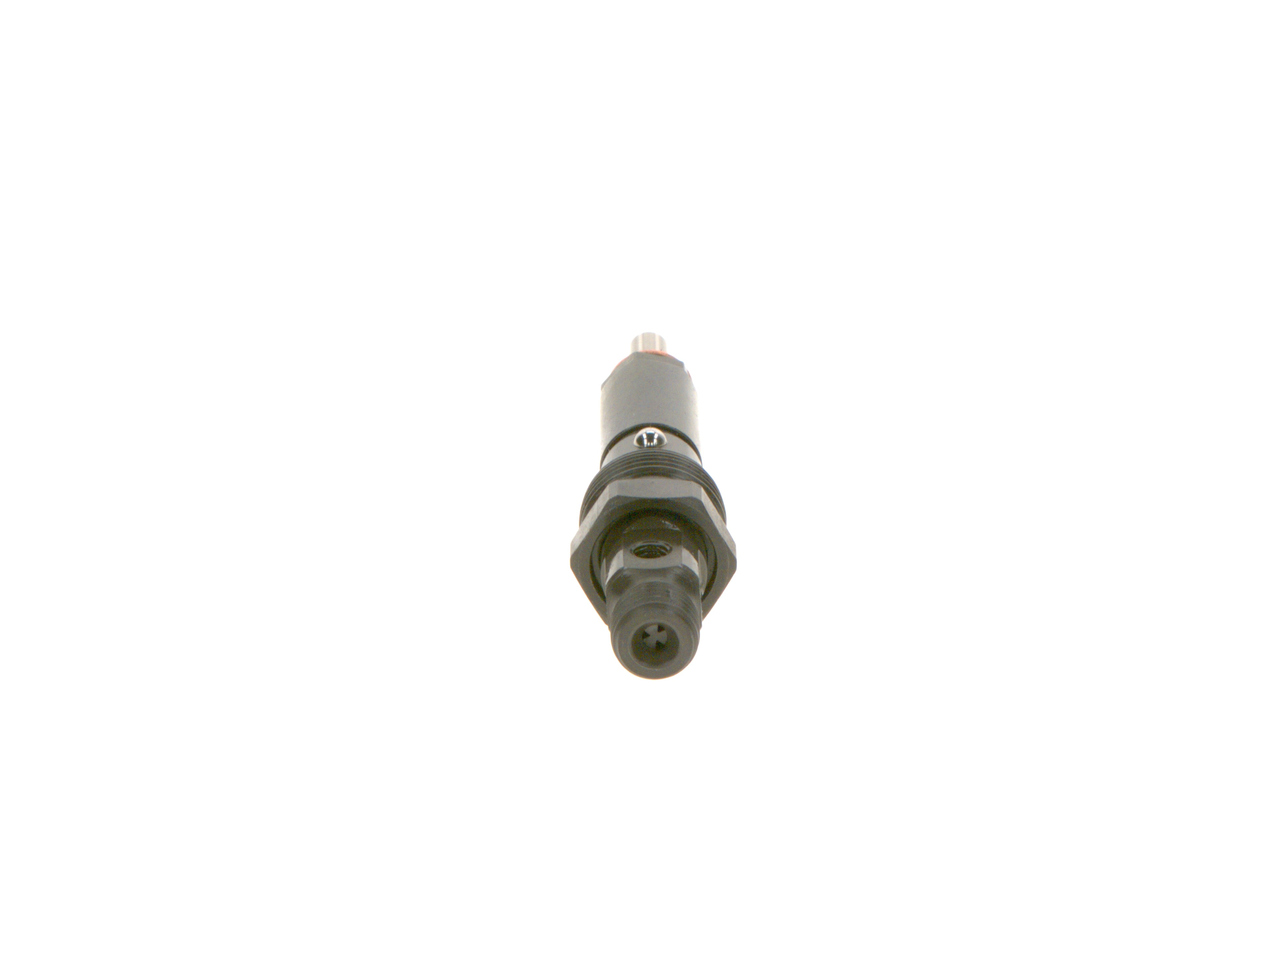 BOSCH 0 432 131 753 Nozzle and Holder Assembly